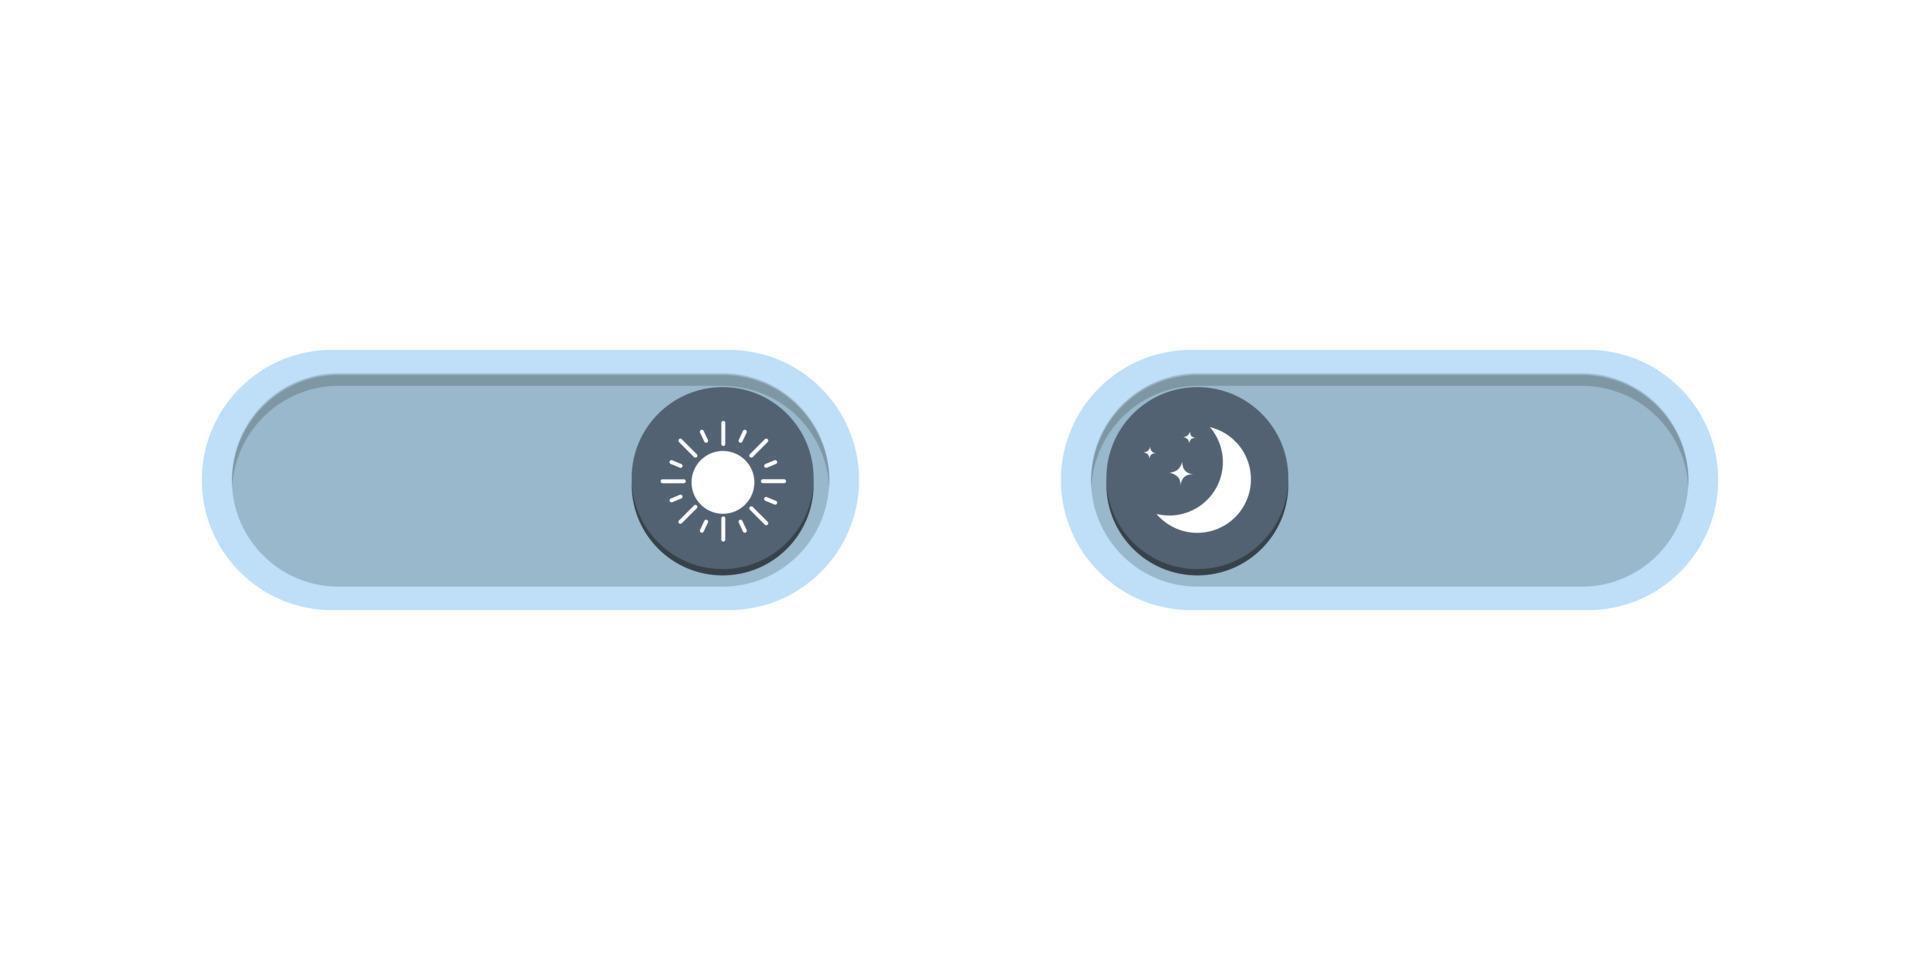 Buttons for switching day and night modes of the mobile device. Light and dark button. Day night switch. Mobile app interface design. Vector illustration.